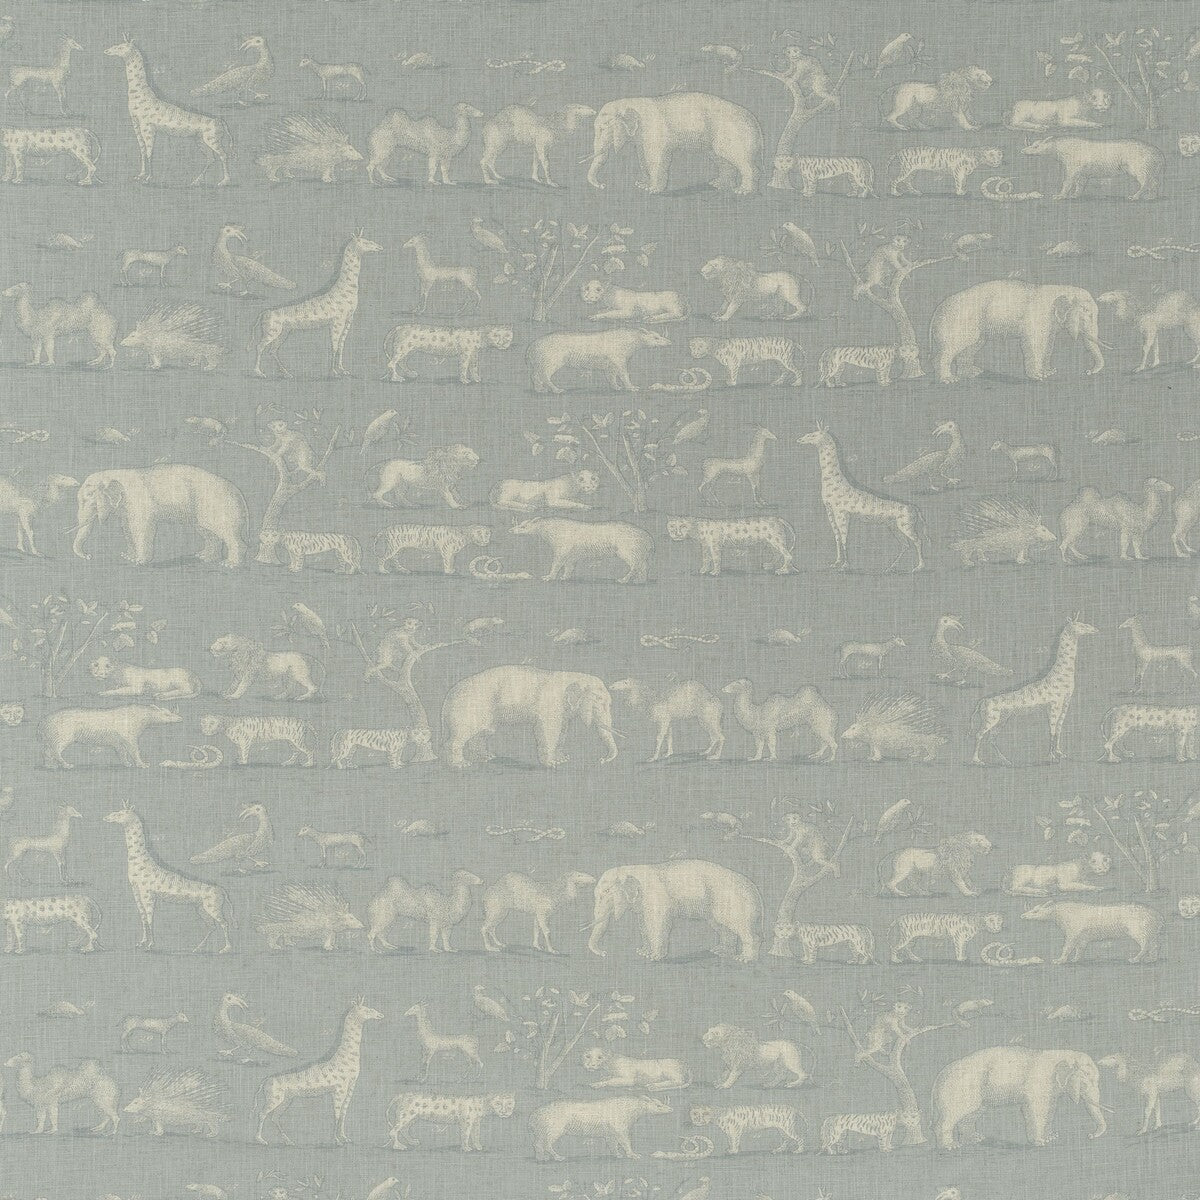 Kingdom fabric in powder color - pattern AM100291.15.0 - by Kravet Couture in the Andrew Martin Expedition collection